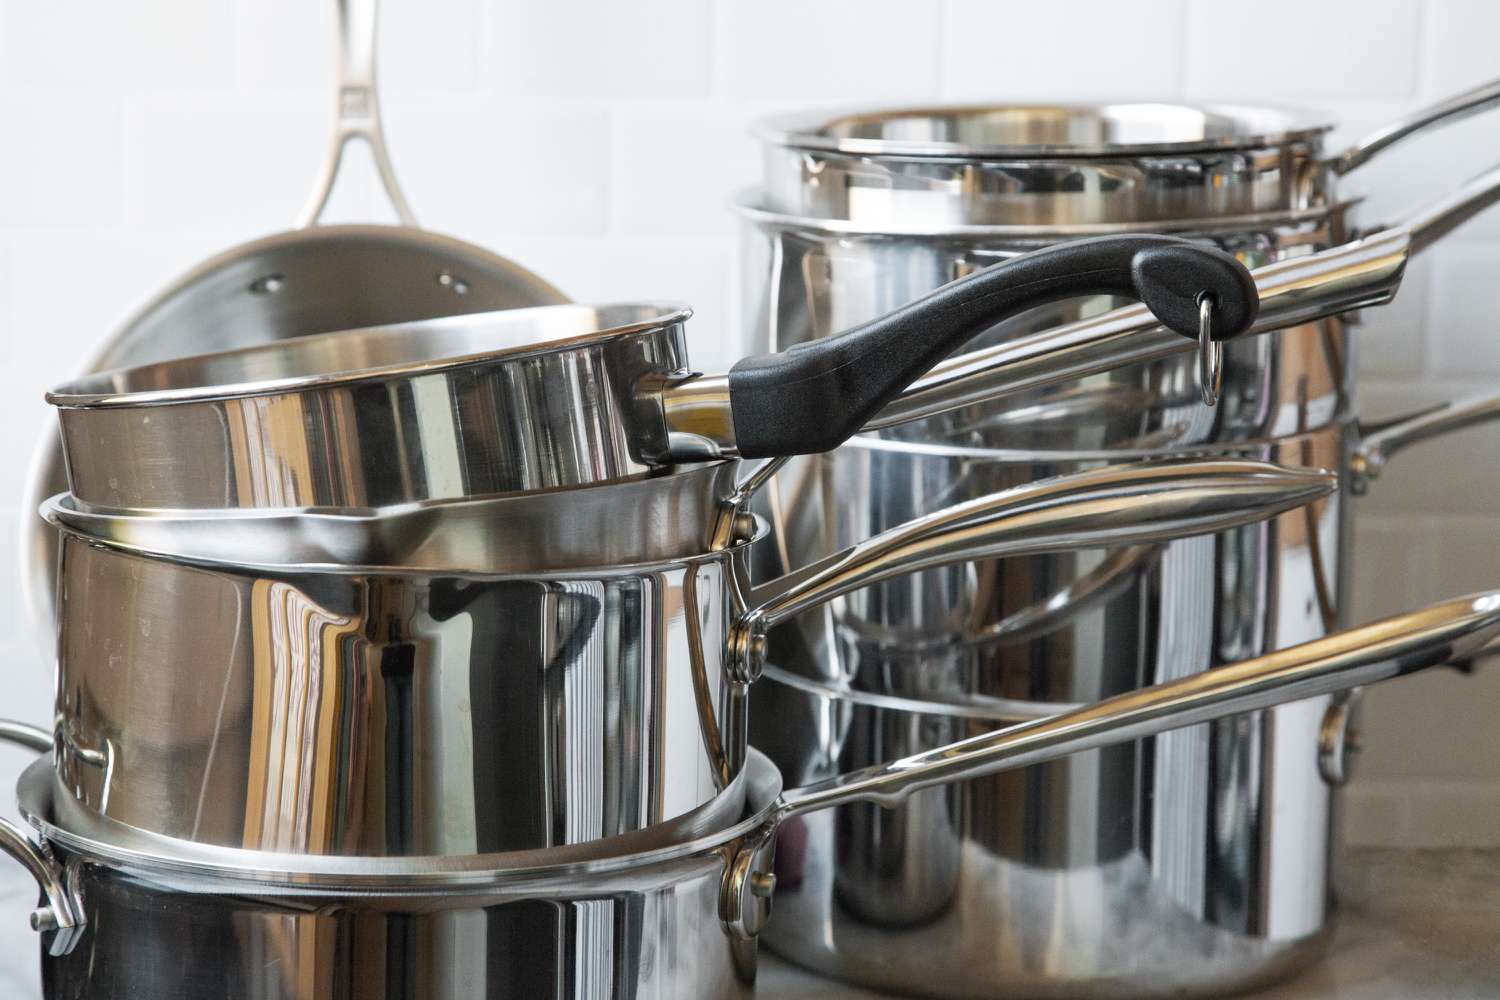 two stacks of stainless steel saucepans on a kitchen countertop